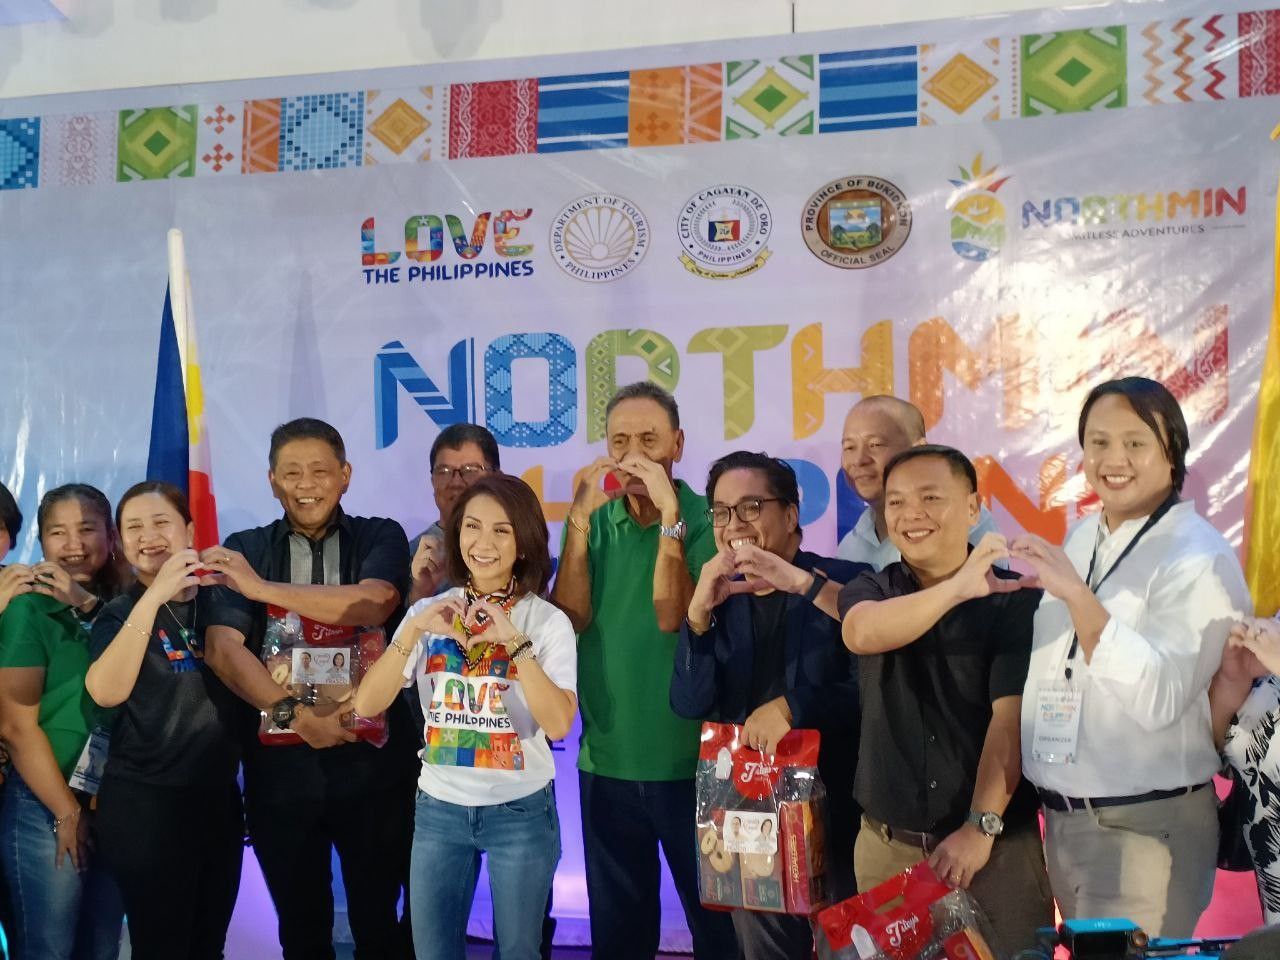 DOT launches Philippine Experience Program in Northern Mindanao